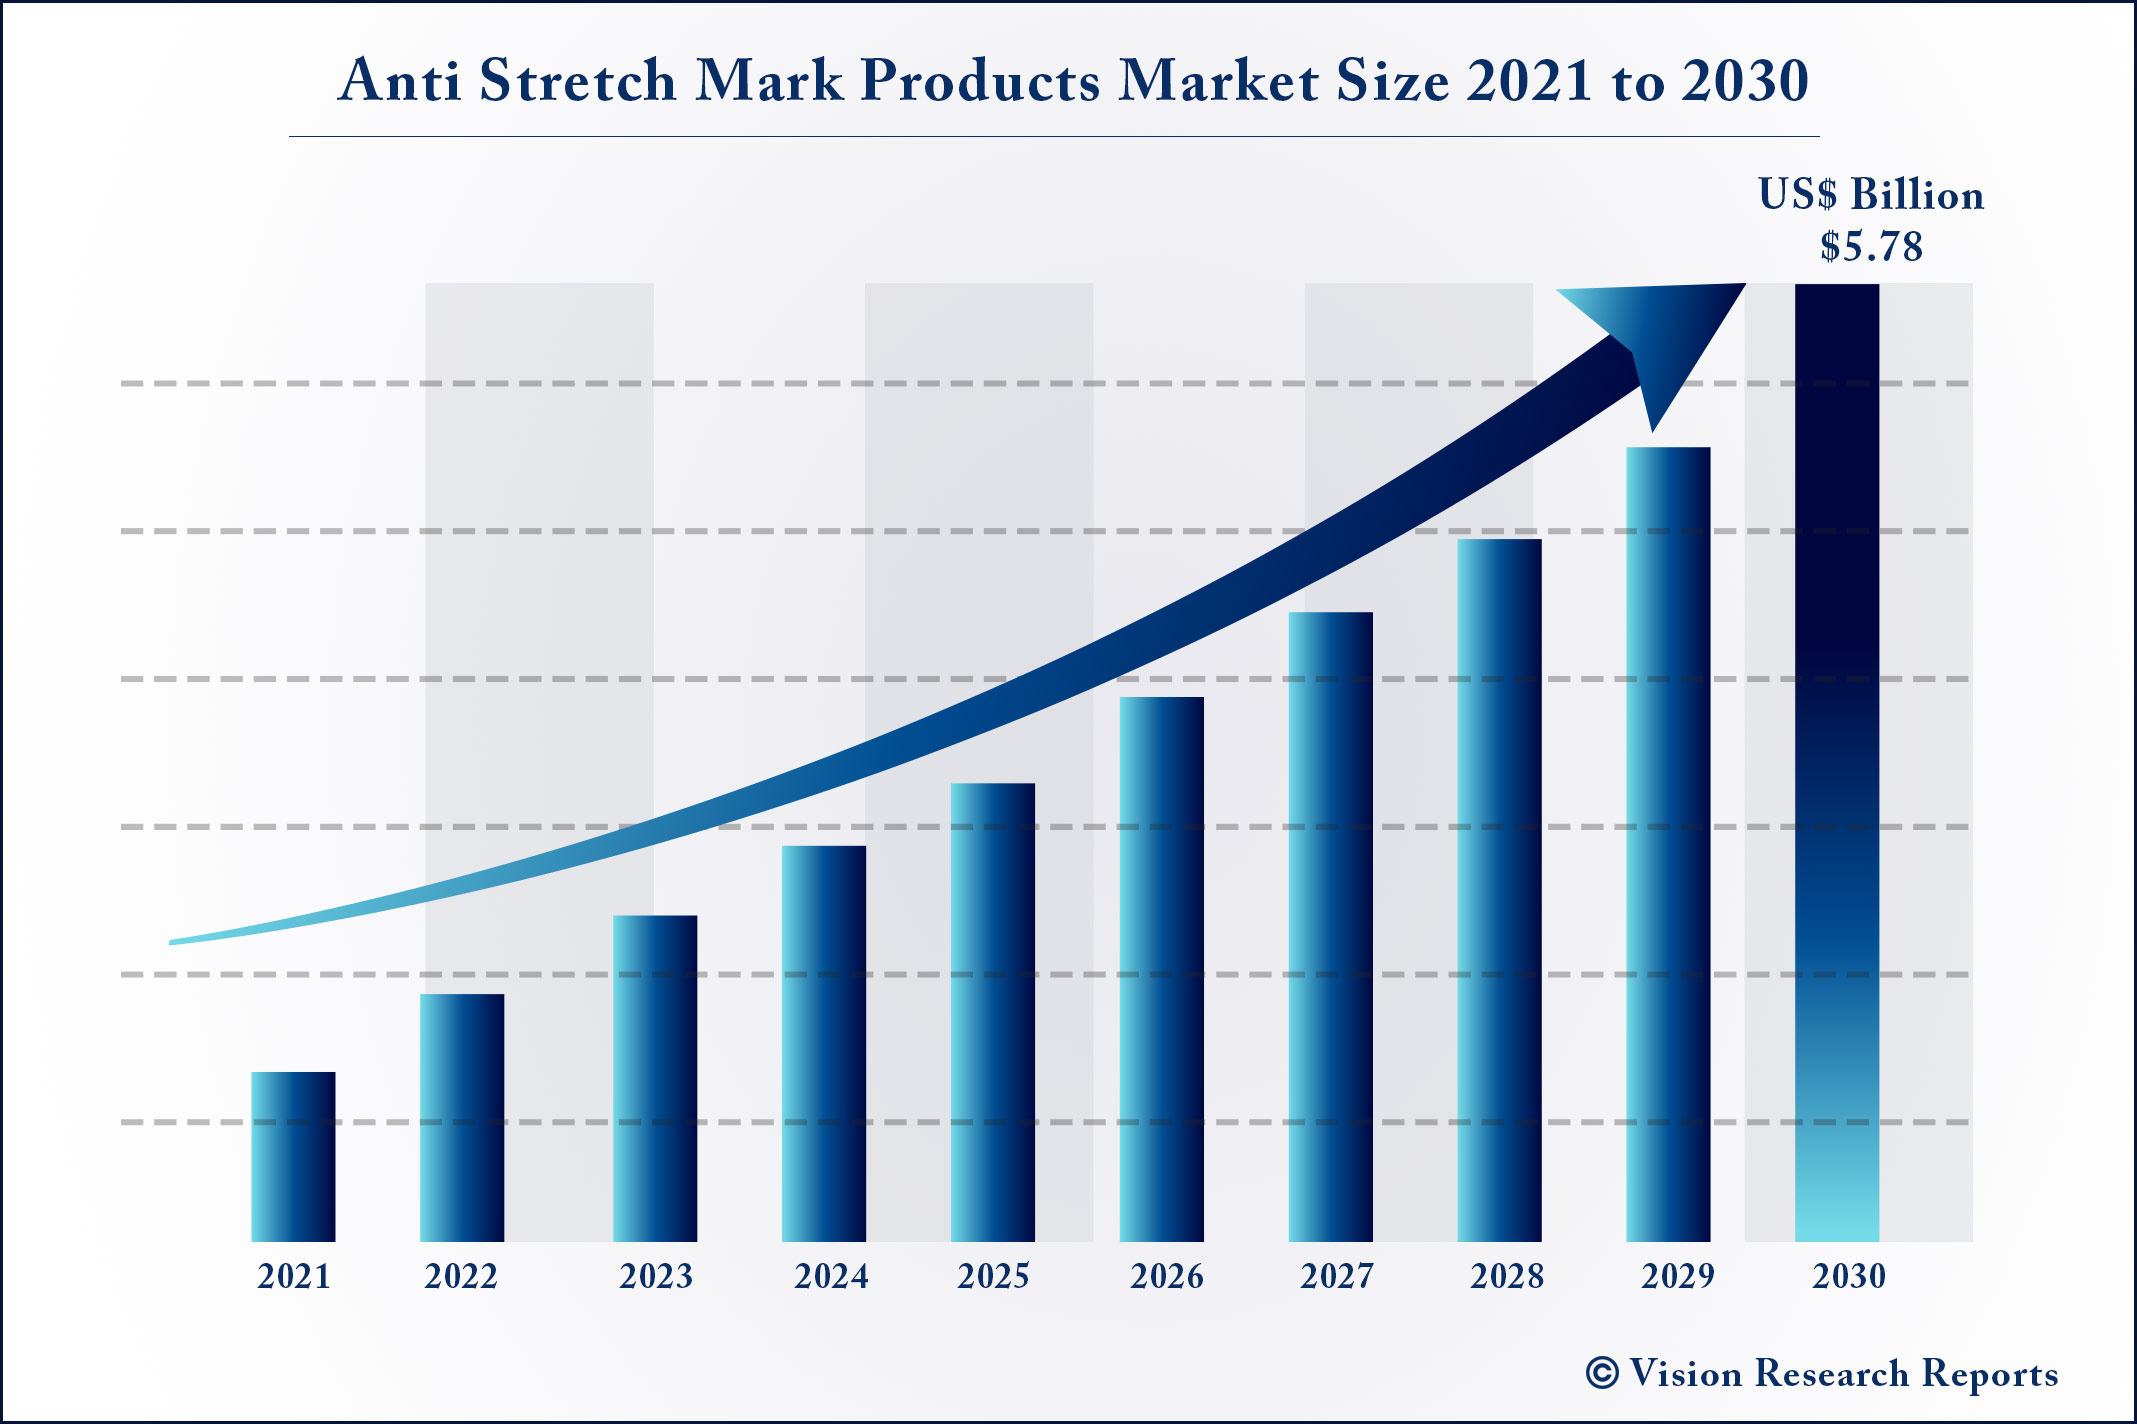 Anti Stretch Mark Products Market Size 2021 to 2030